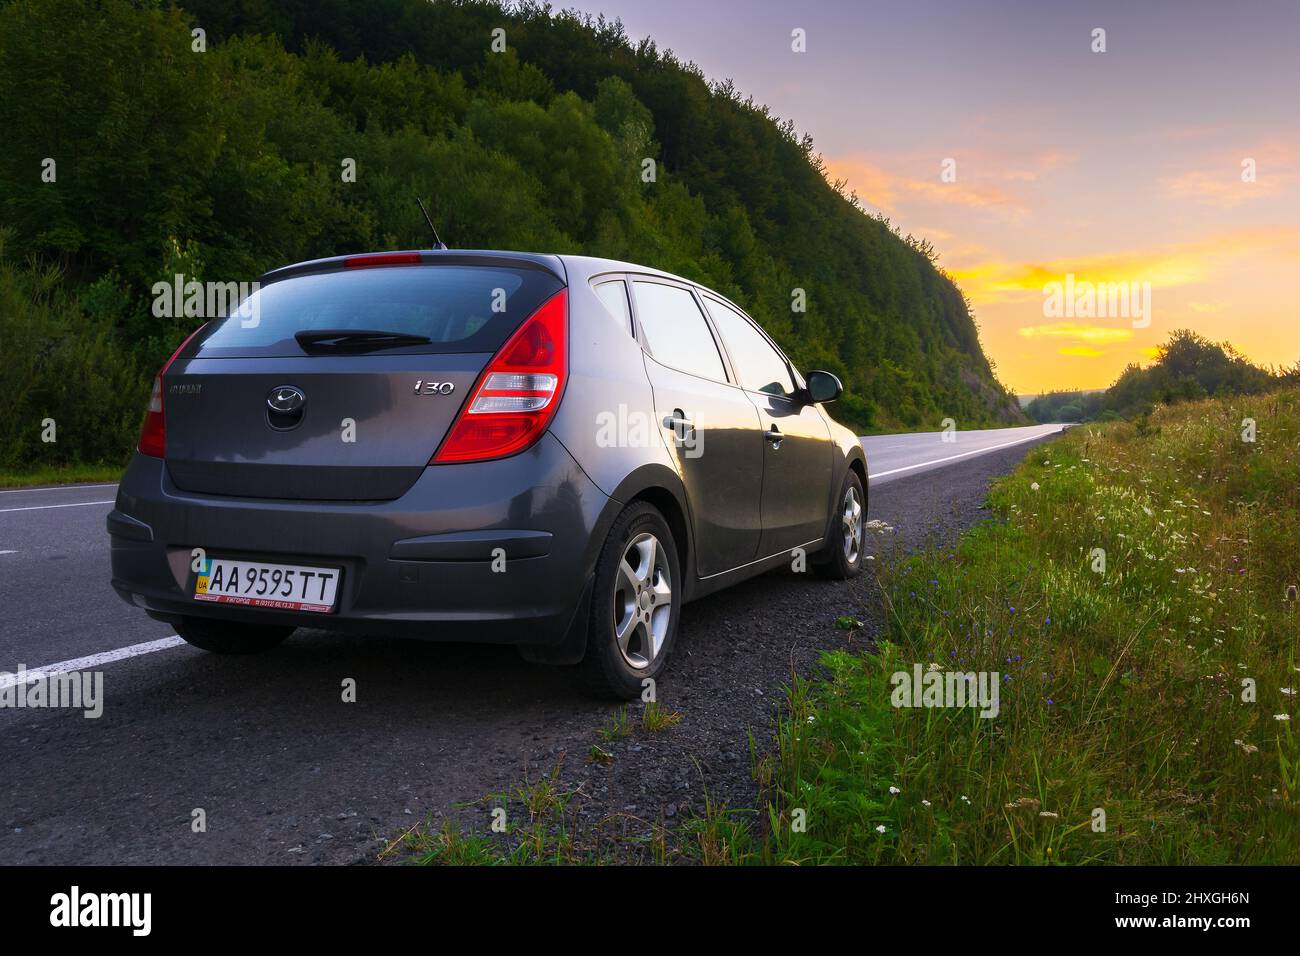 abranka, ukraine - AUG 08, 2020: hatchback on the roadside of mountain pass. wonderful countryside scenery at dawn. glowing clouds on the sky in summe Stock Photo